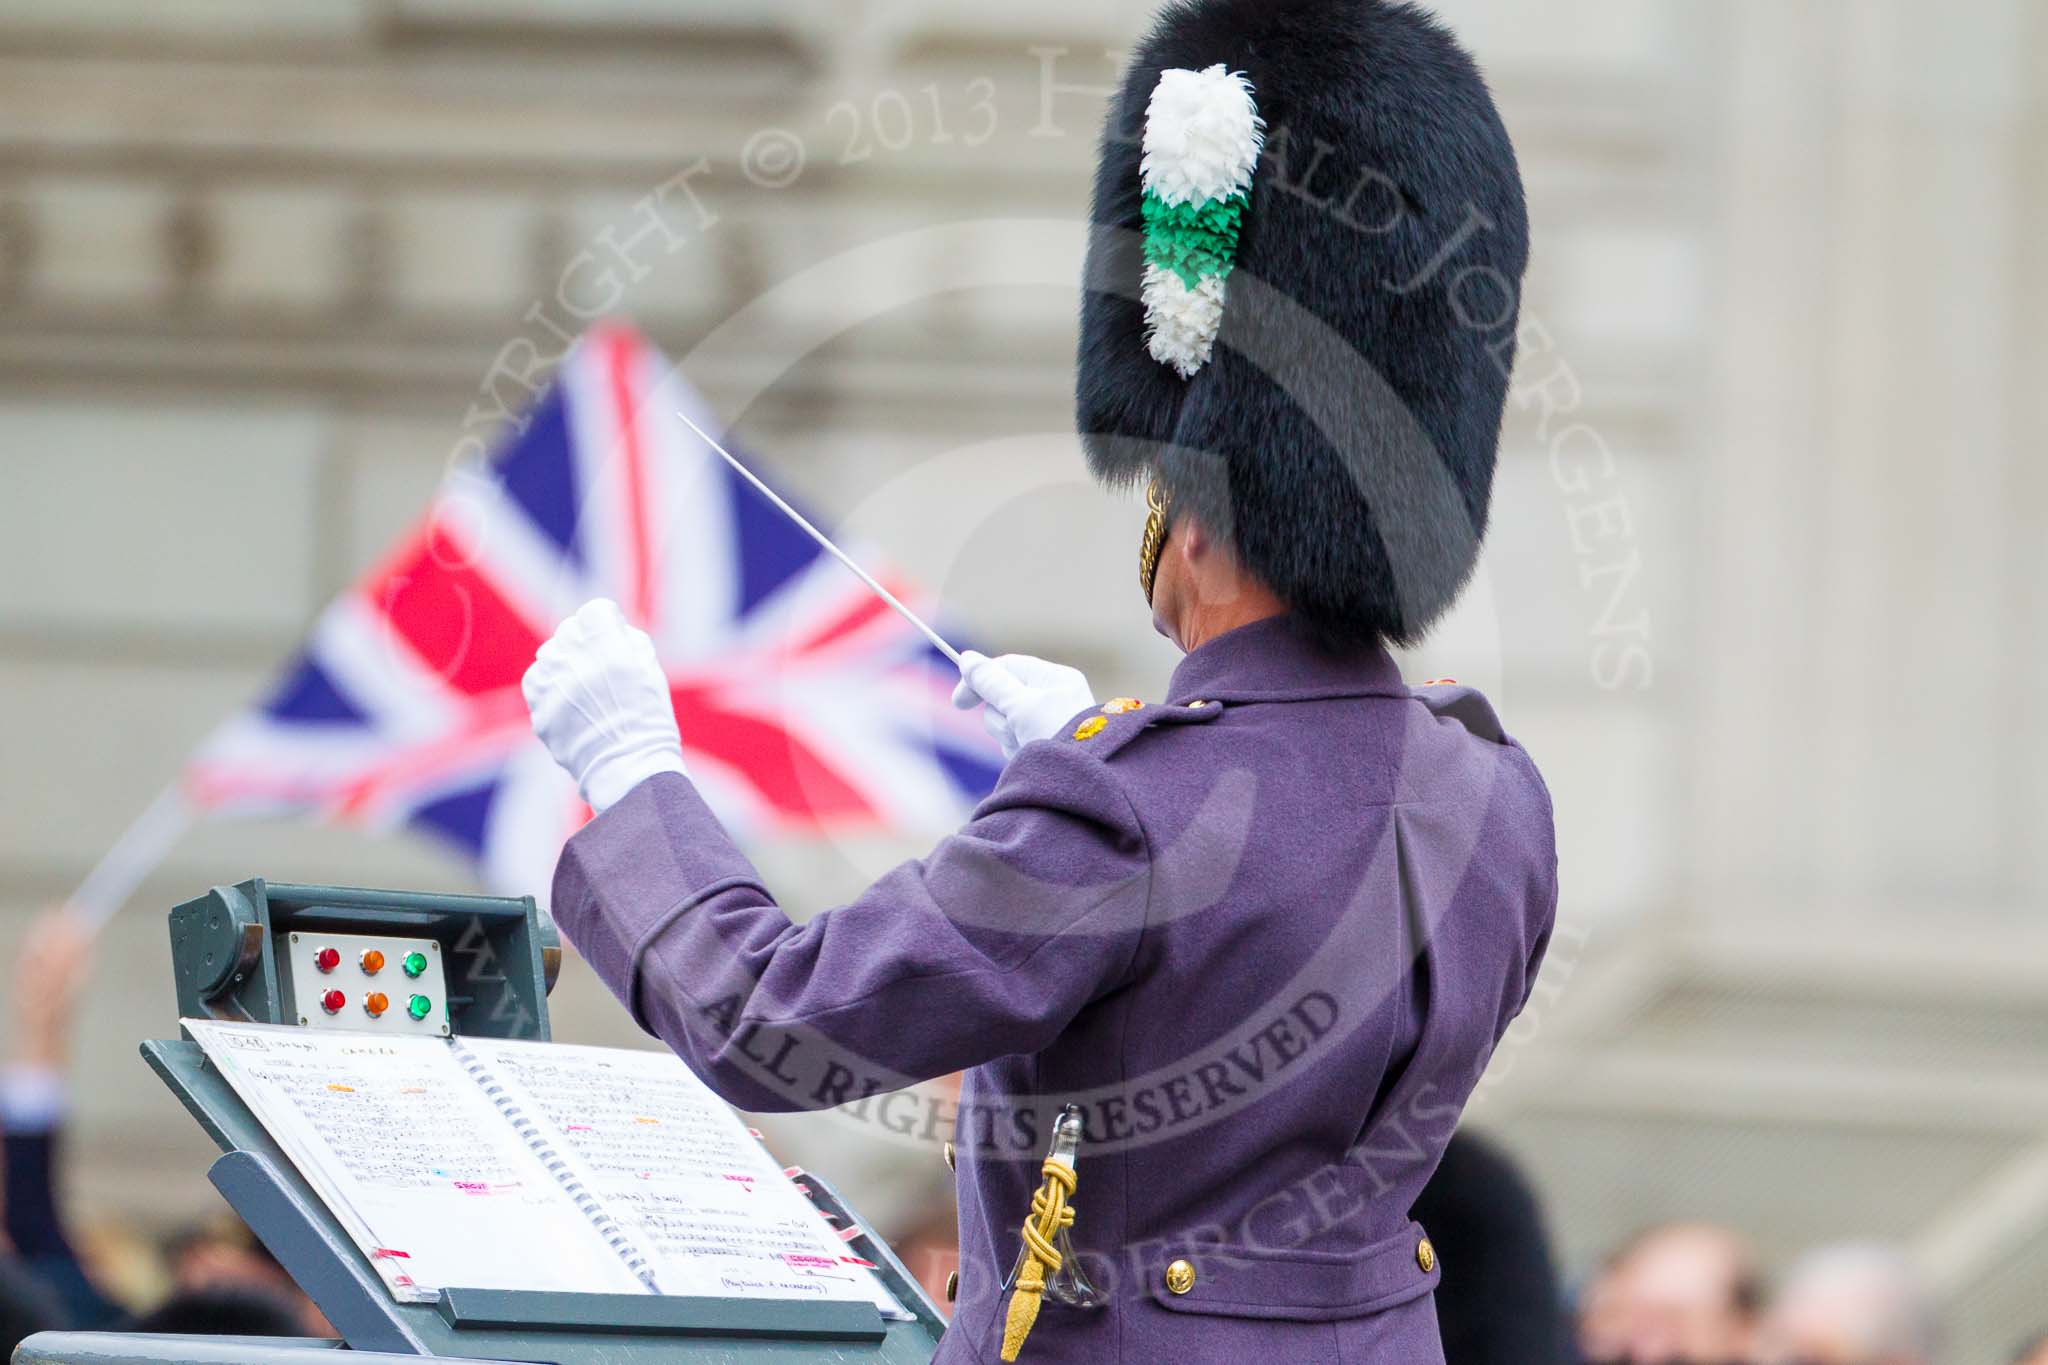 Remembrance Sunday at the Cenotaph 2015: The Senior Director of Music, Lieutenant
Colonel Kevin Roberts, conducting during the Cenotaph Ceremony 2015. Image #71, 08 November 2015 10:51 Whitehall, London, UK